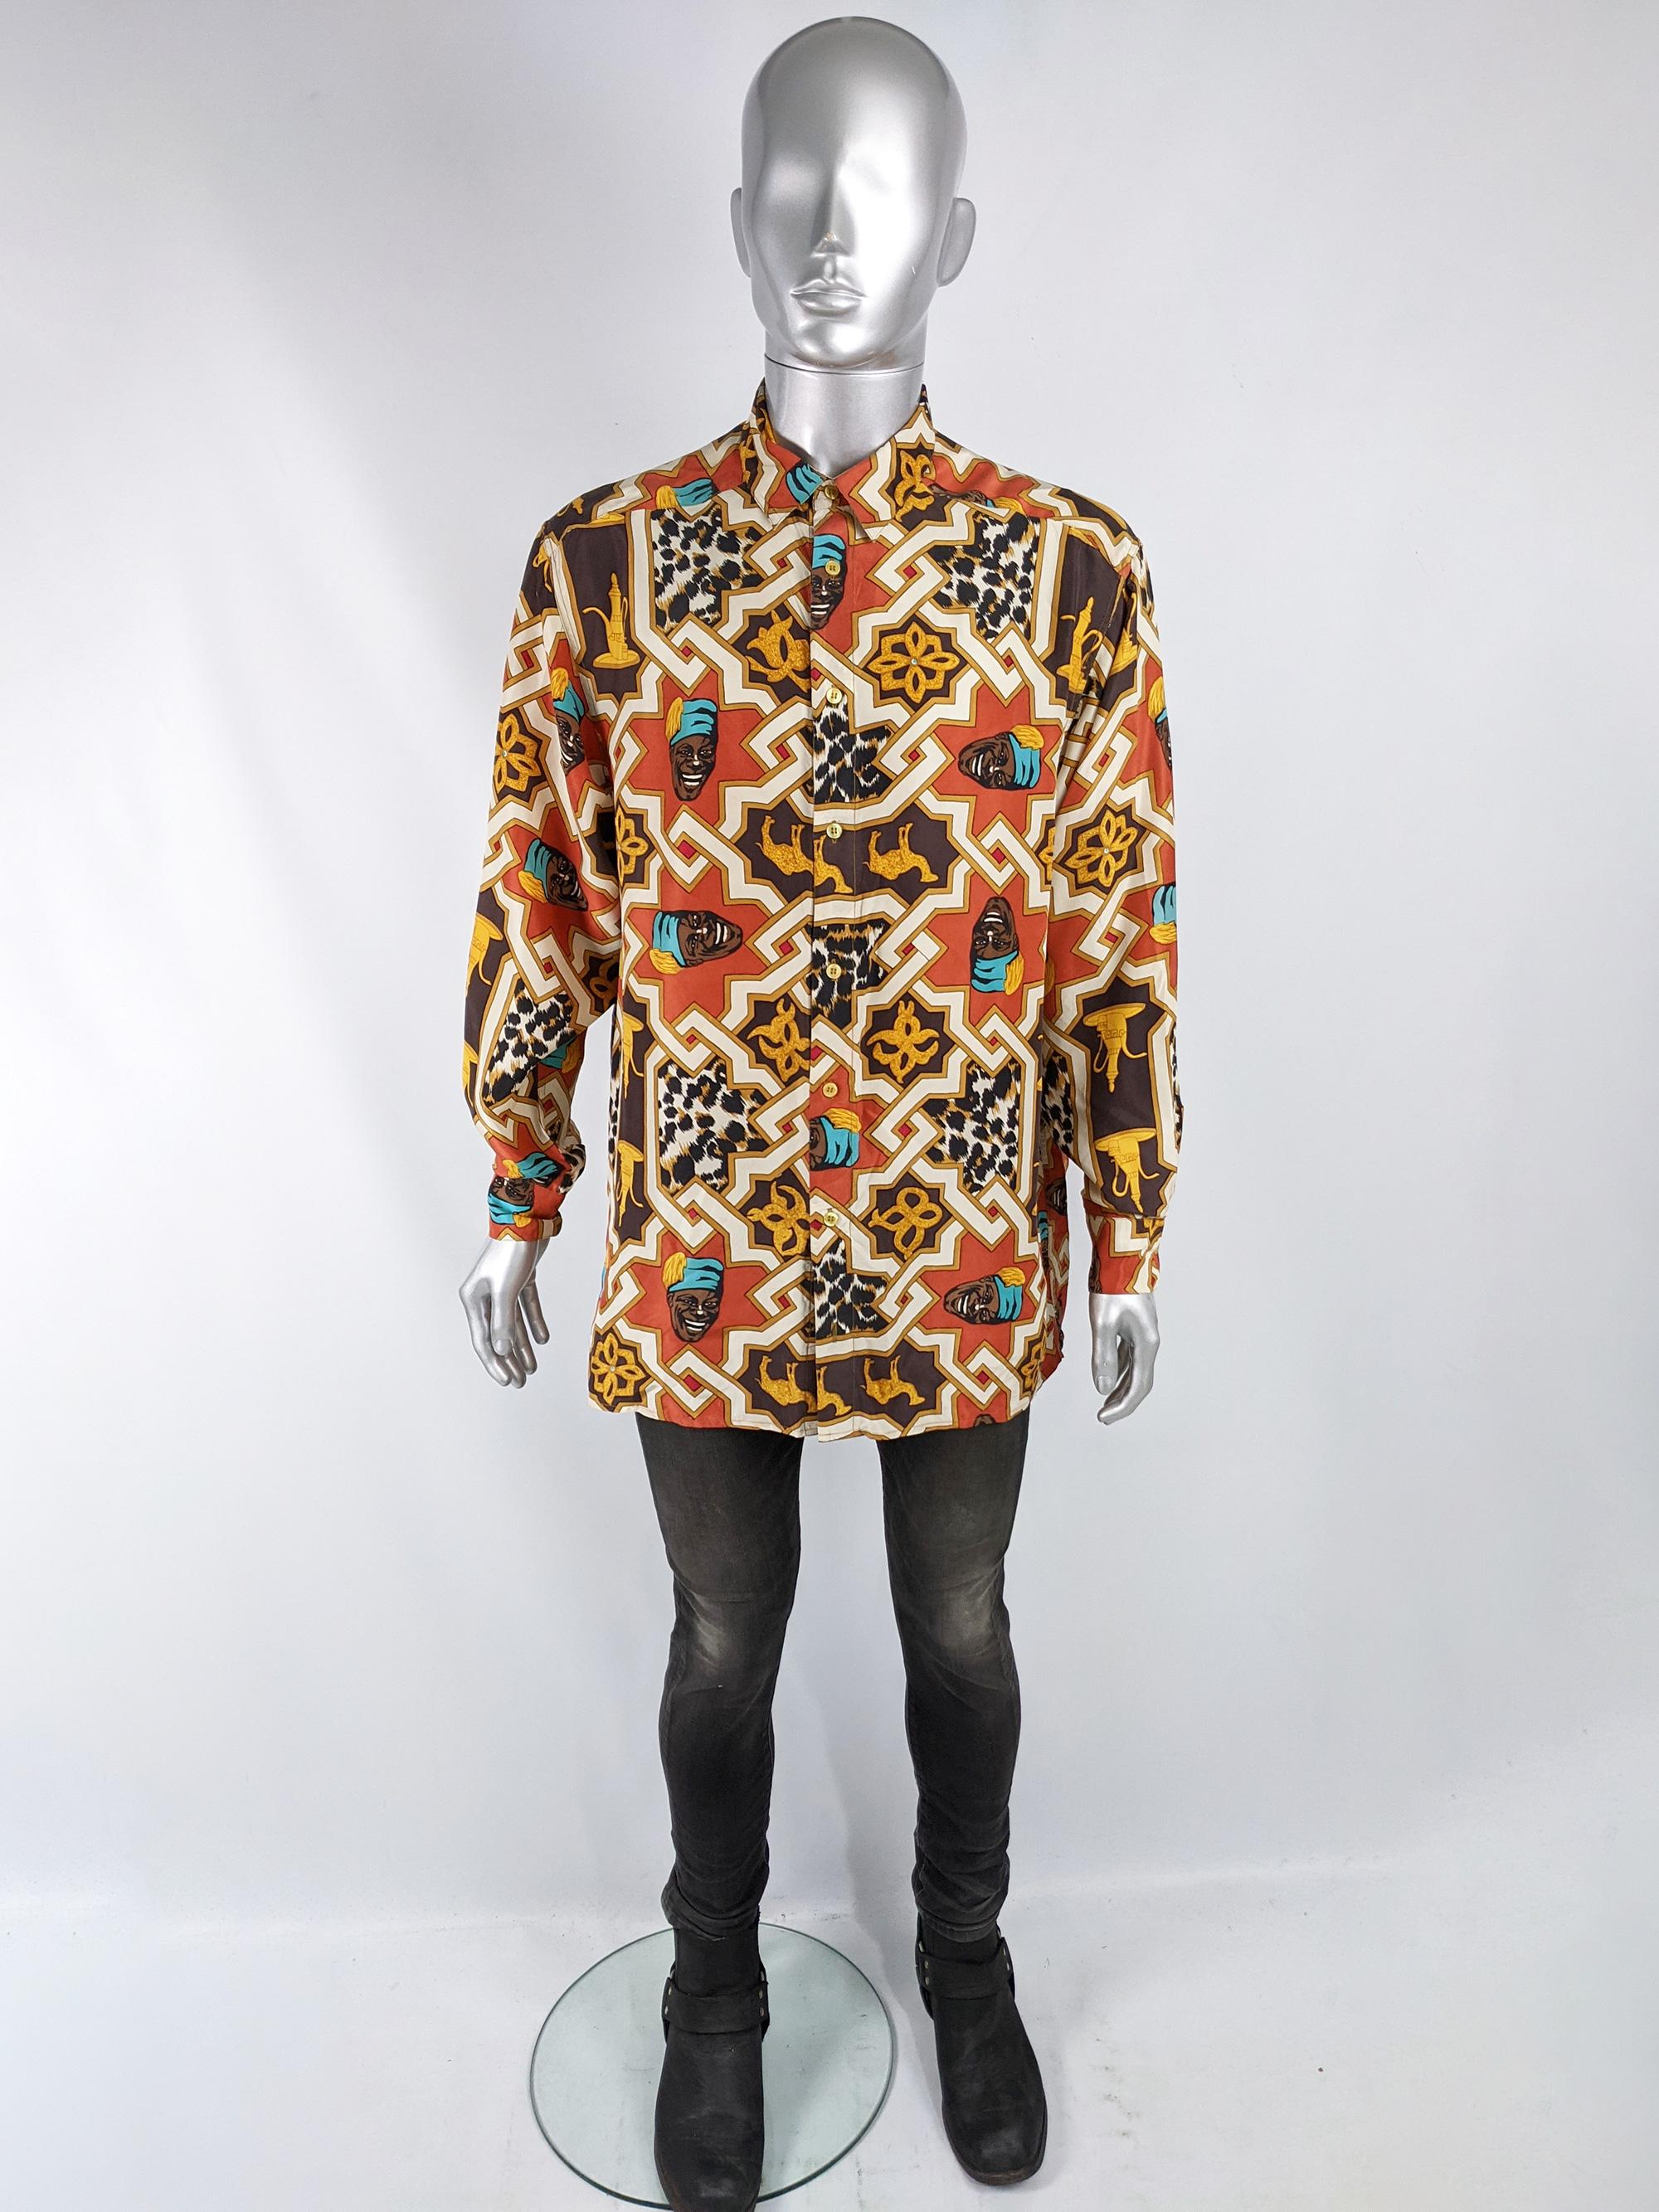 An incredible vintage mens shirt from the late 80s by luxury British fashion house, Joseph. In a bold all over patterned pure silk with a Moorish style and leopard print throughout. It has a loose, effortless fit. 

Size: Marked M but this gives a